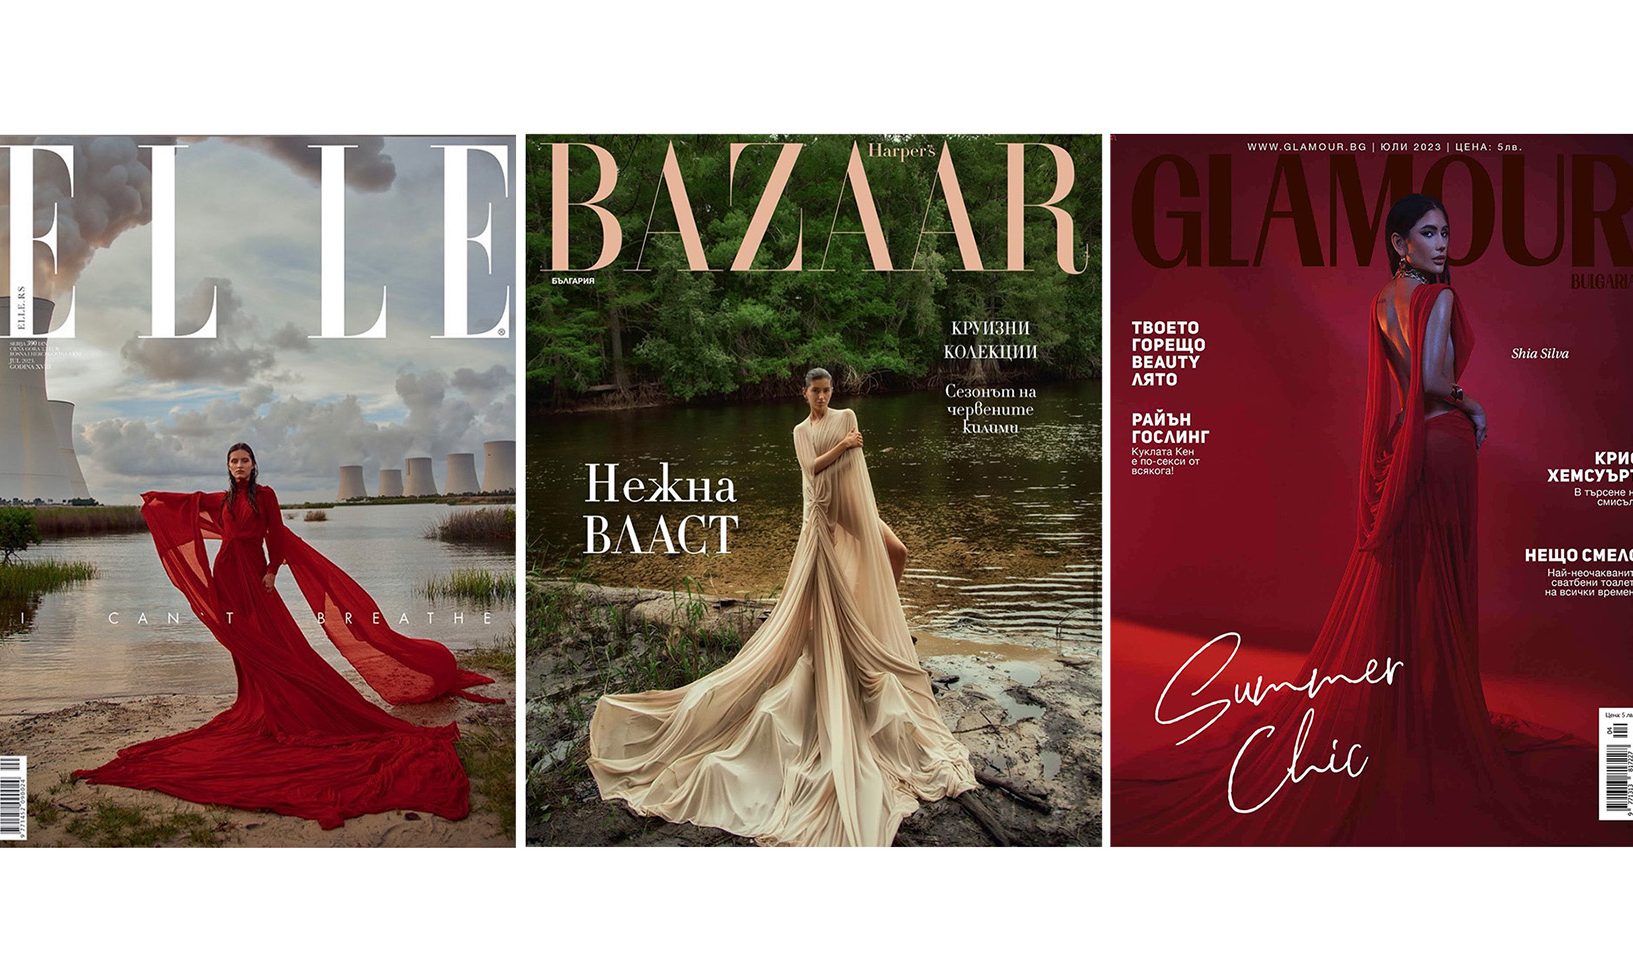 Covers ELLE BAZZAR GLAMOUR